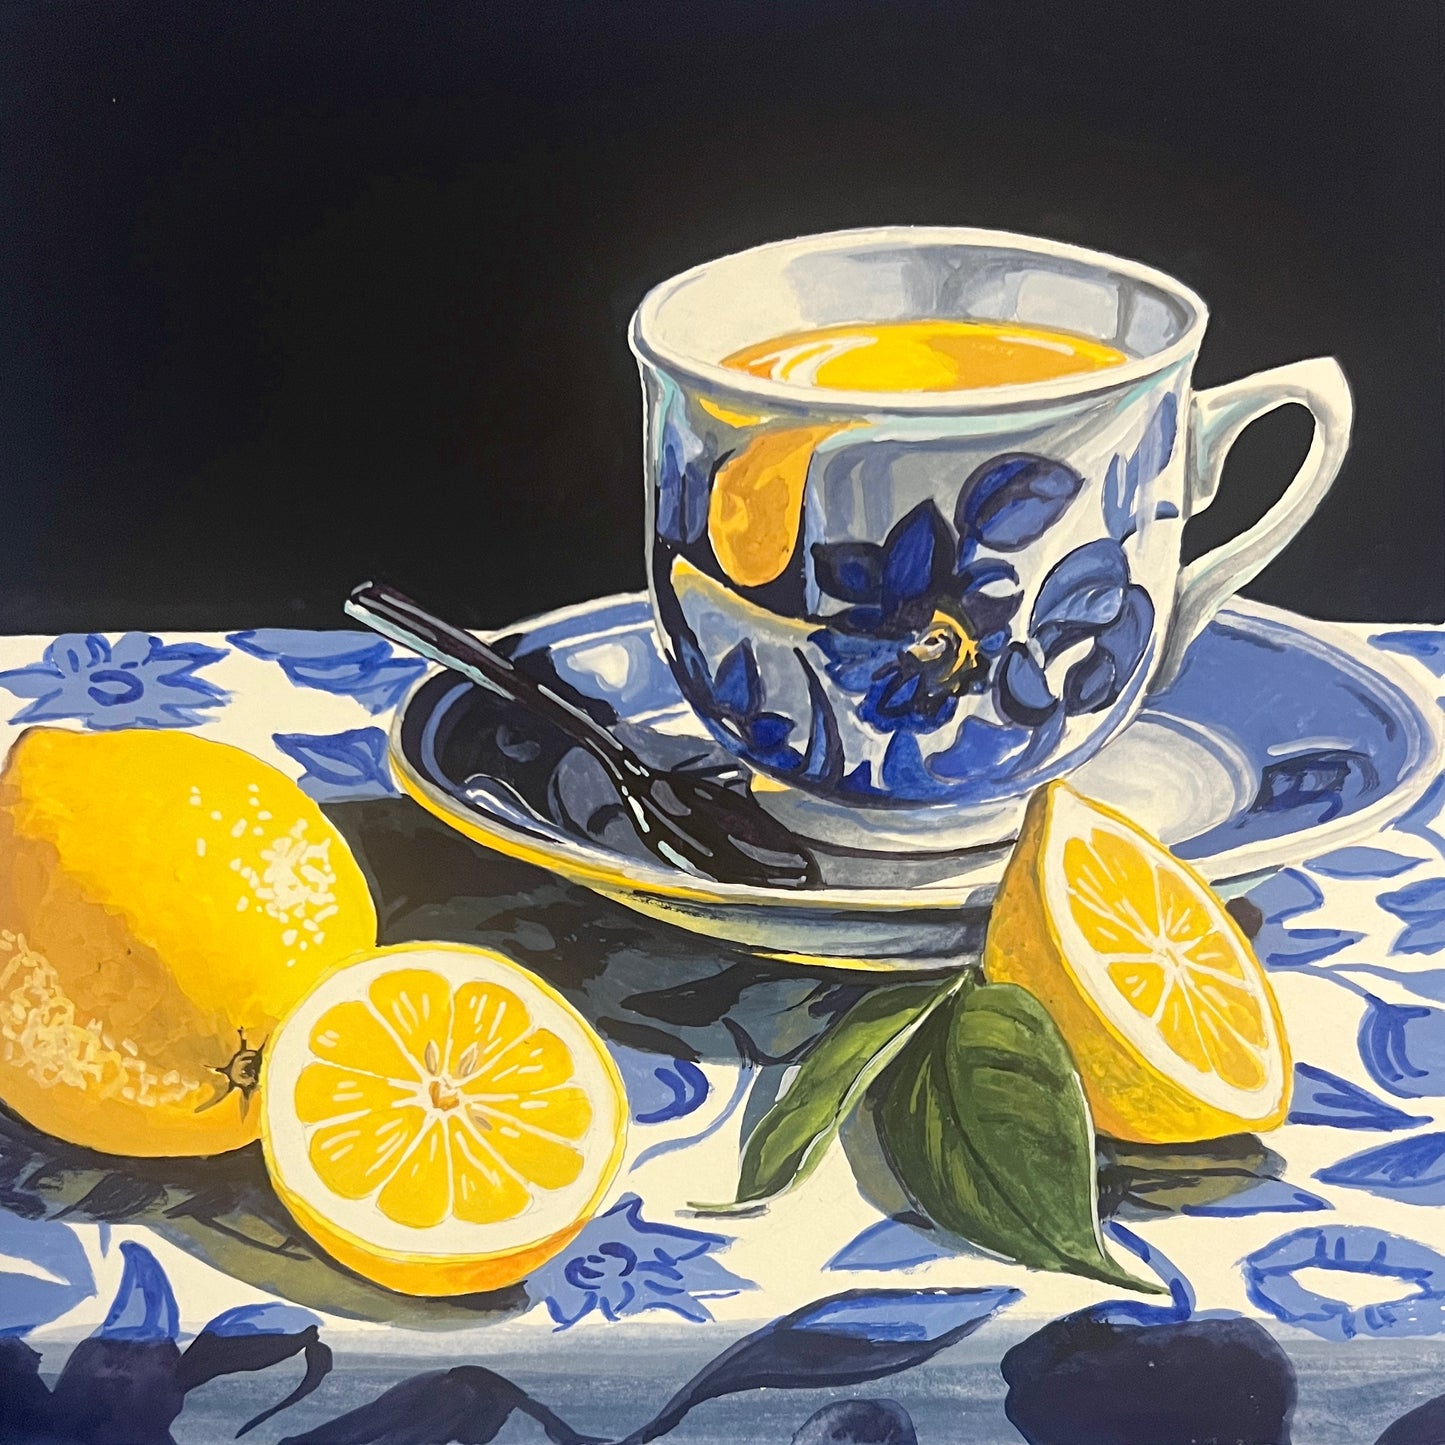 A Cup of Tea with Lemon